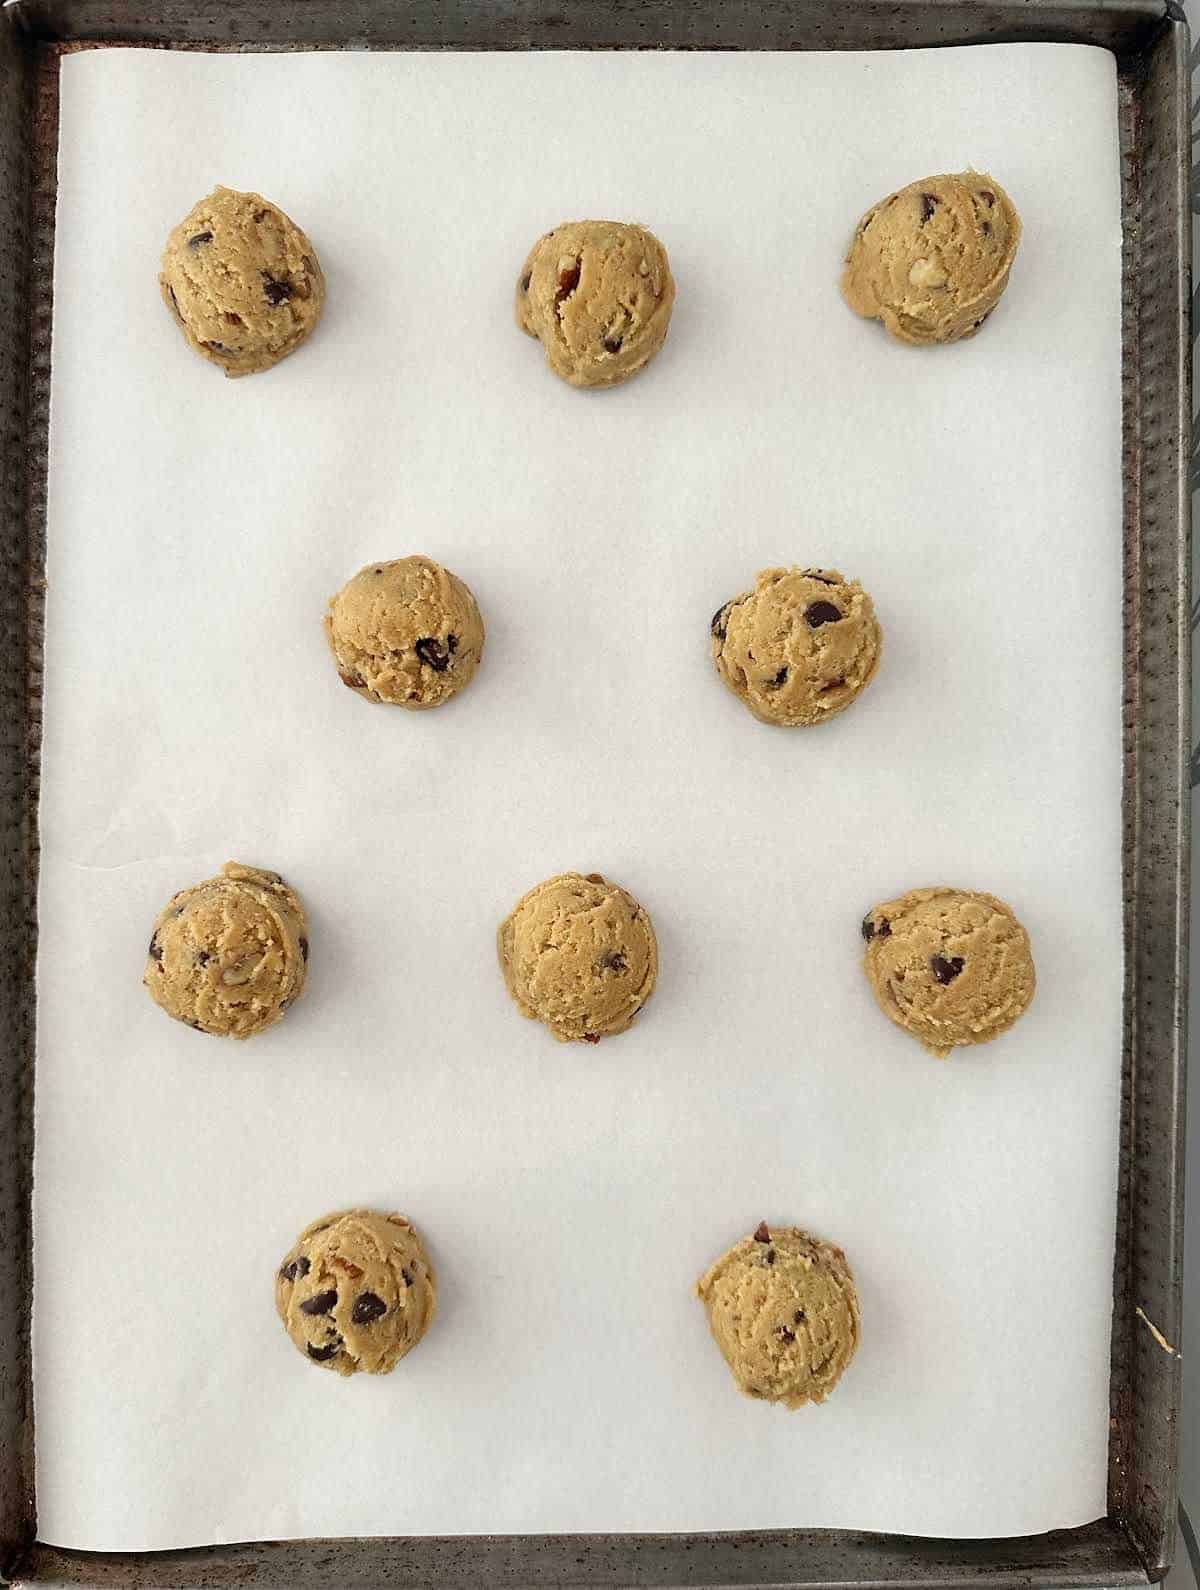 Parchment paper lined cookie sheet with chocolate chip pecan cookie scoops.